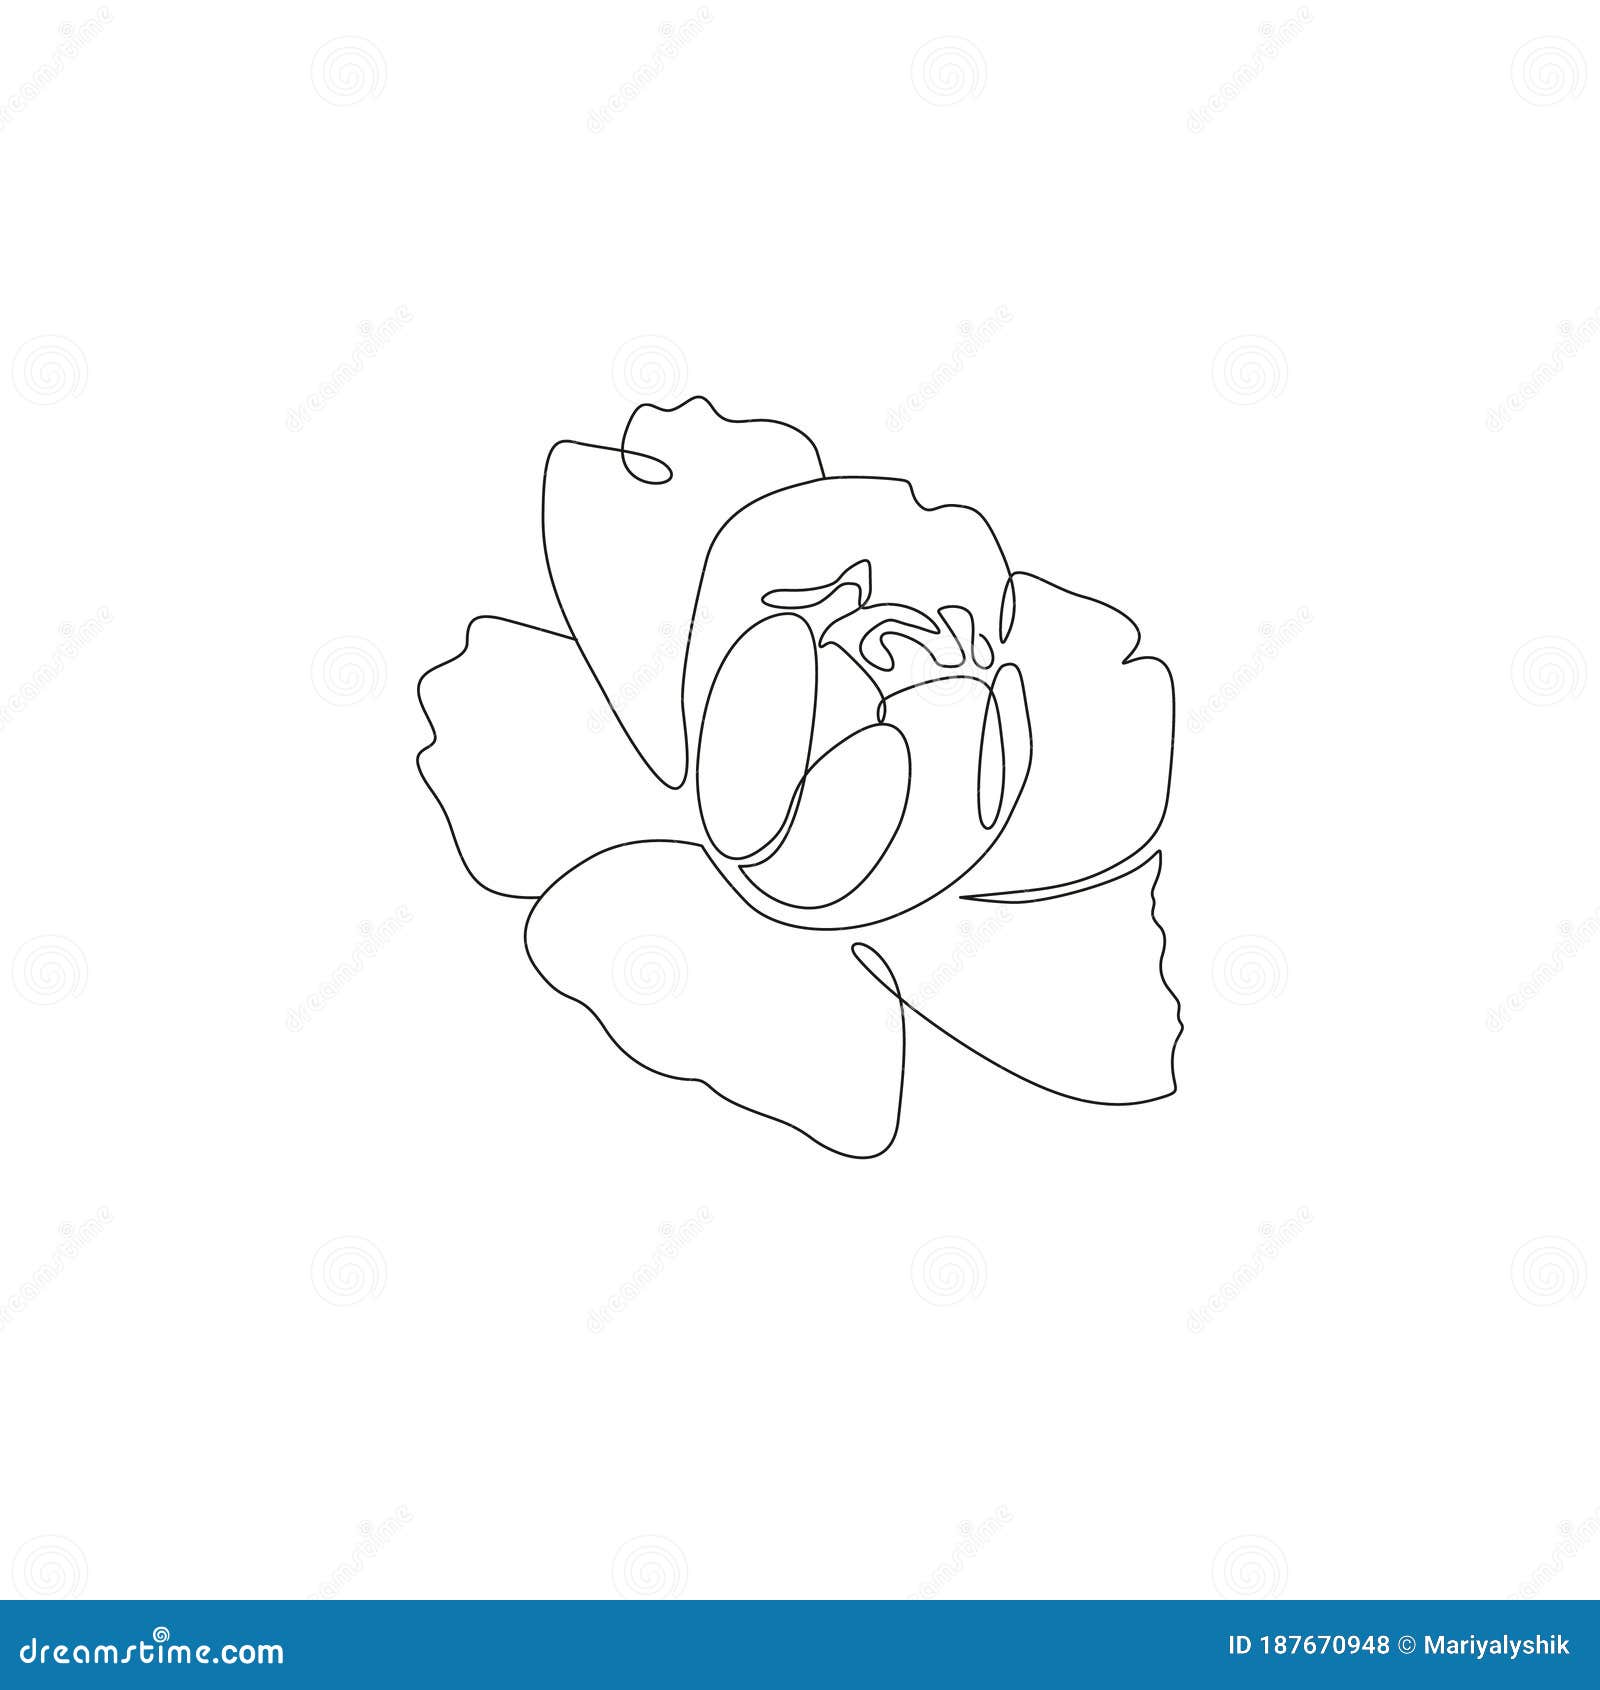 One Line Rose Design Hand Drawn Minimalism Style Stock Illustration   Download Image Now  Rose  Flower Line Art Drawing  Activity  iStock